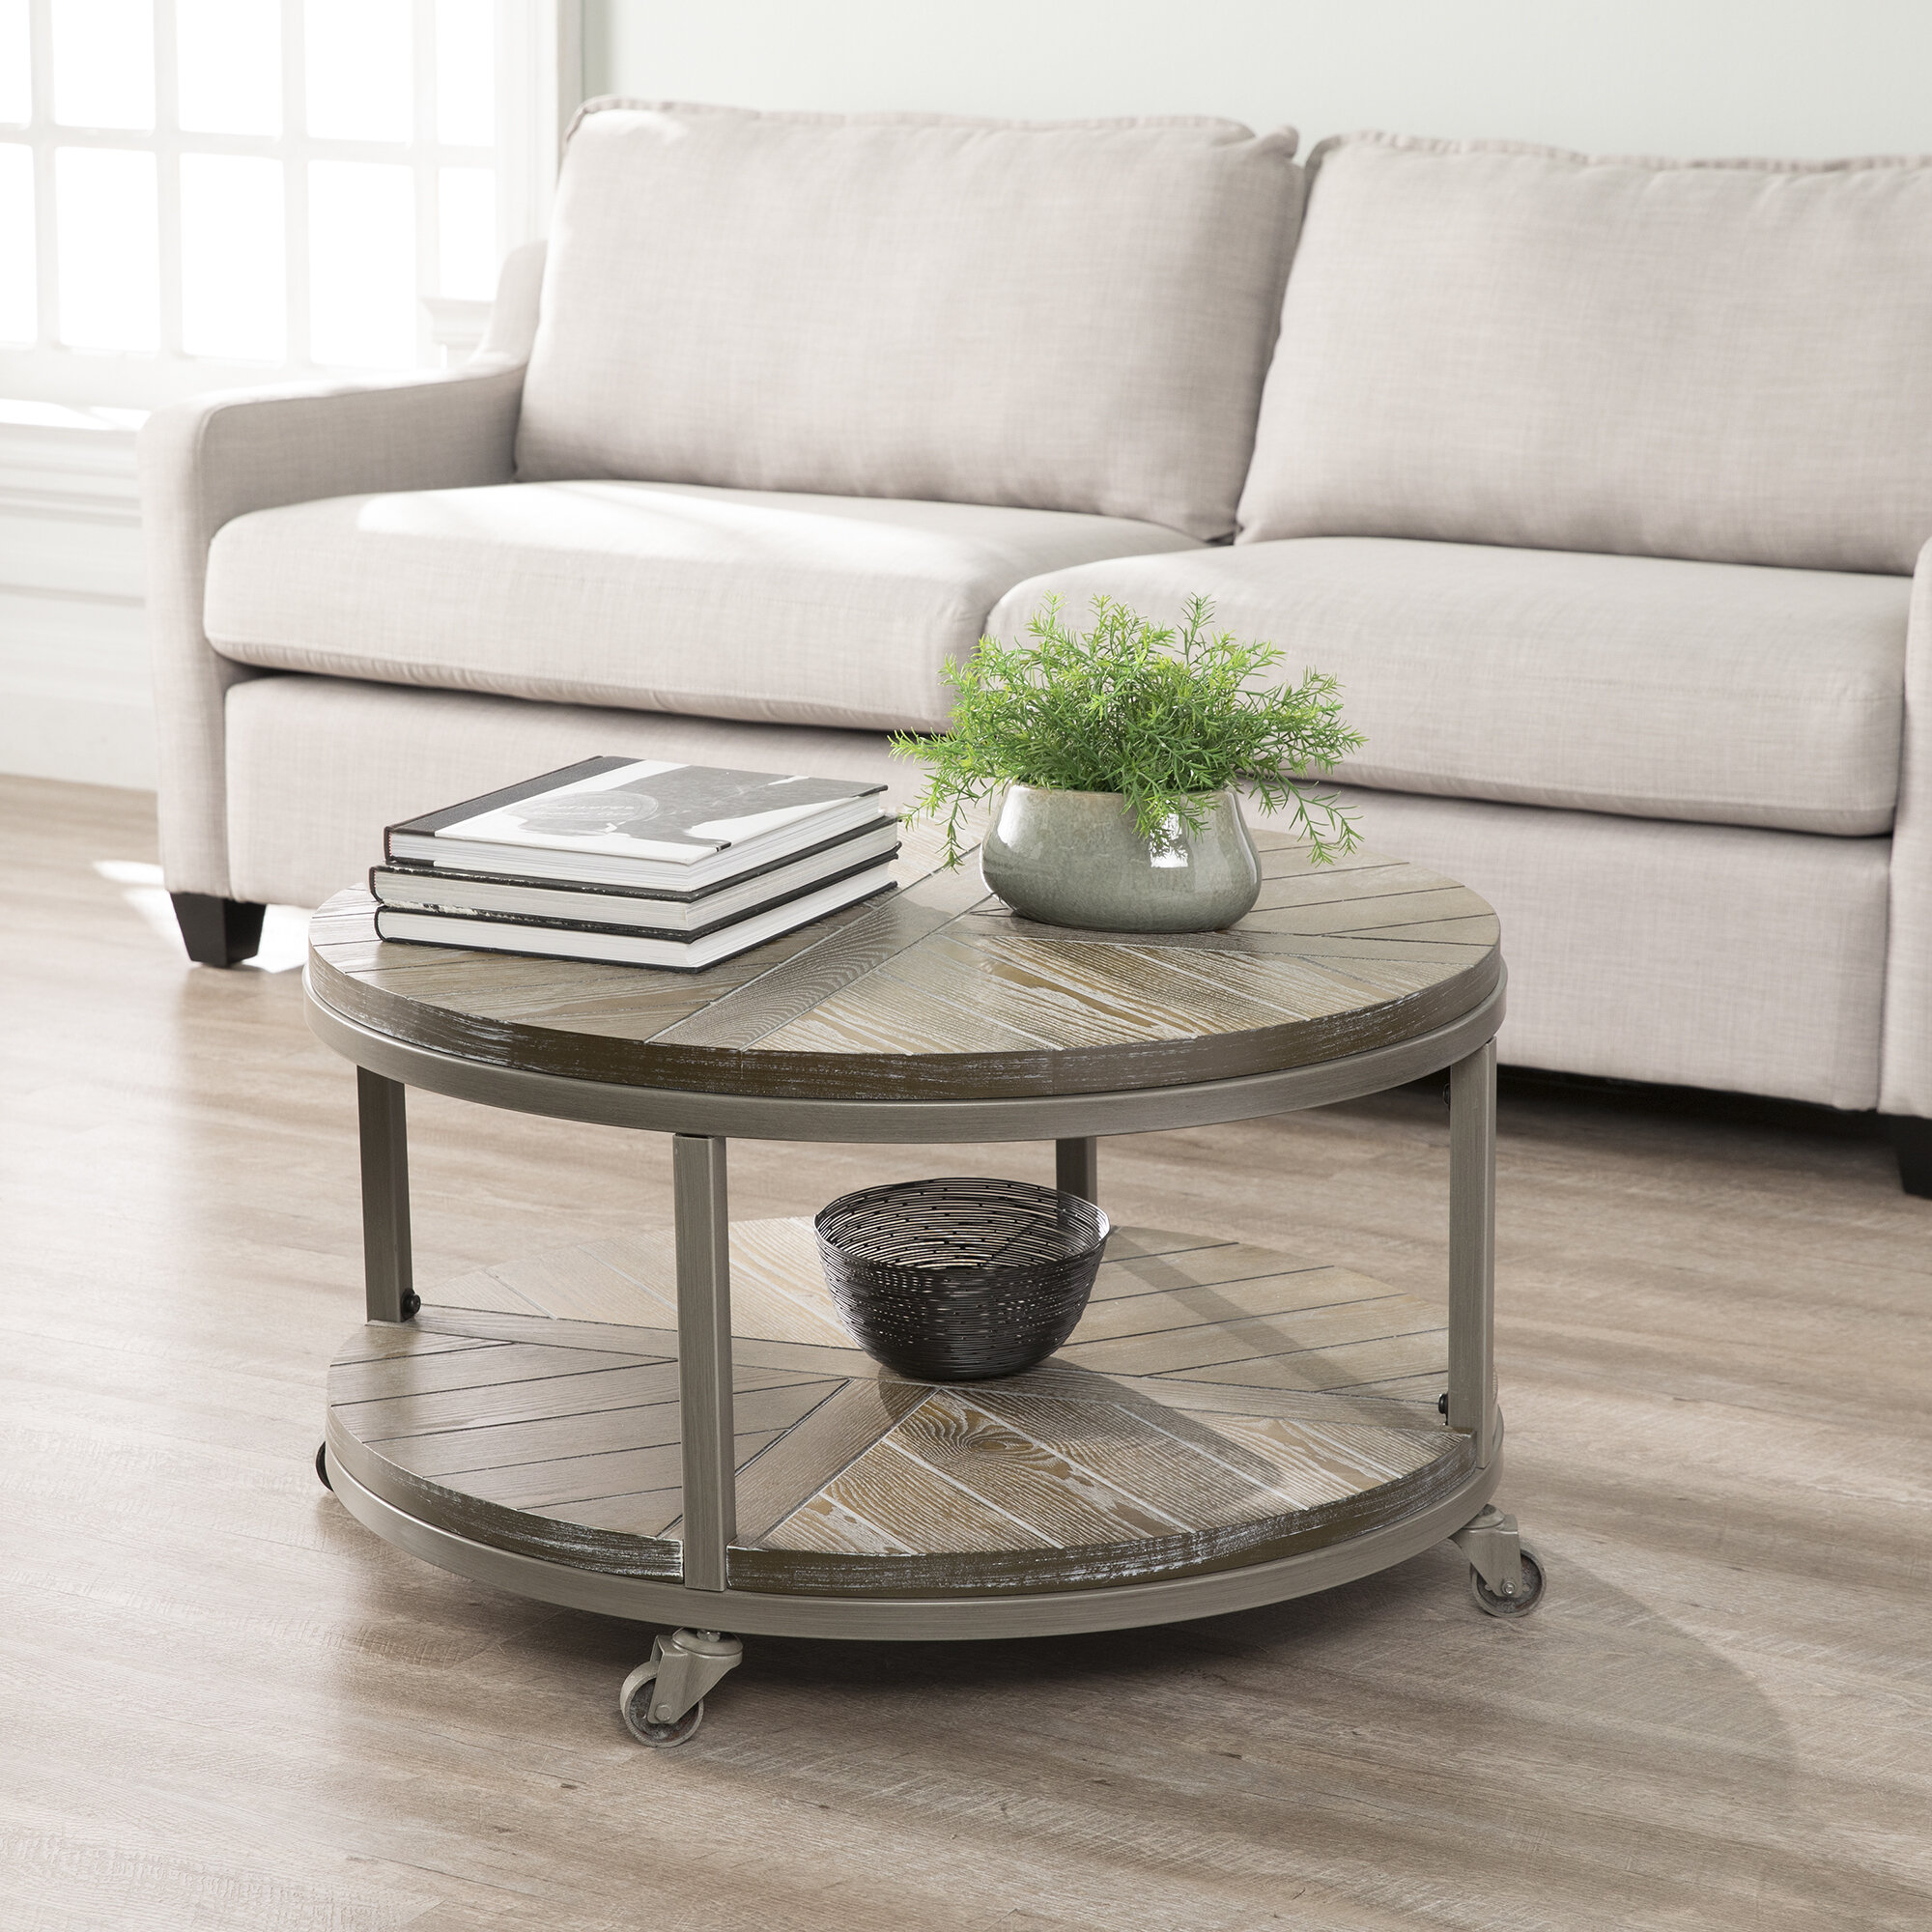 Coffee Table With Wheels Youll Love In 2021 Visualhunt